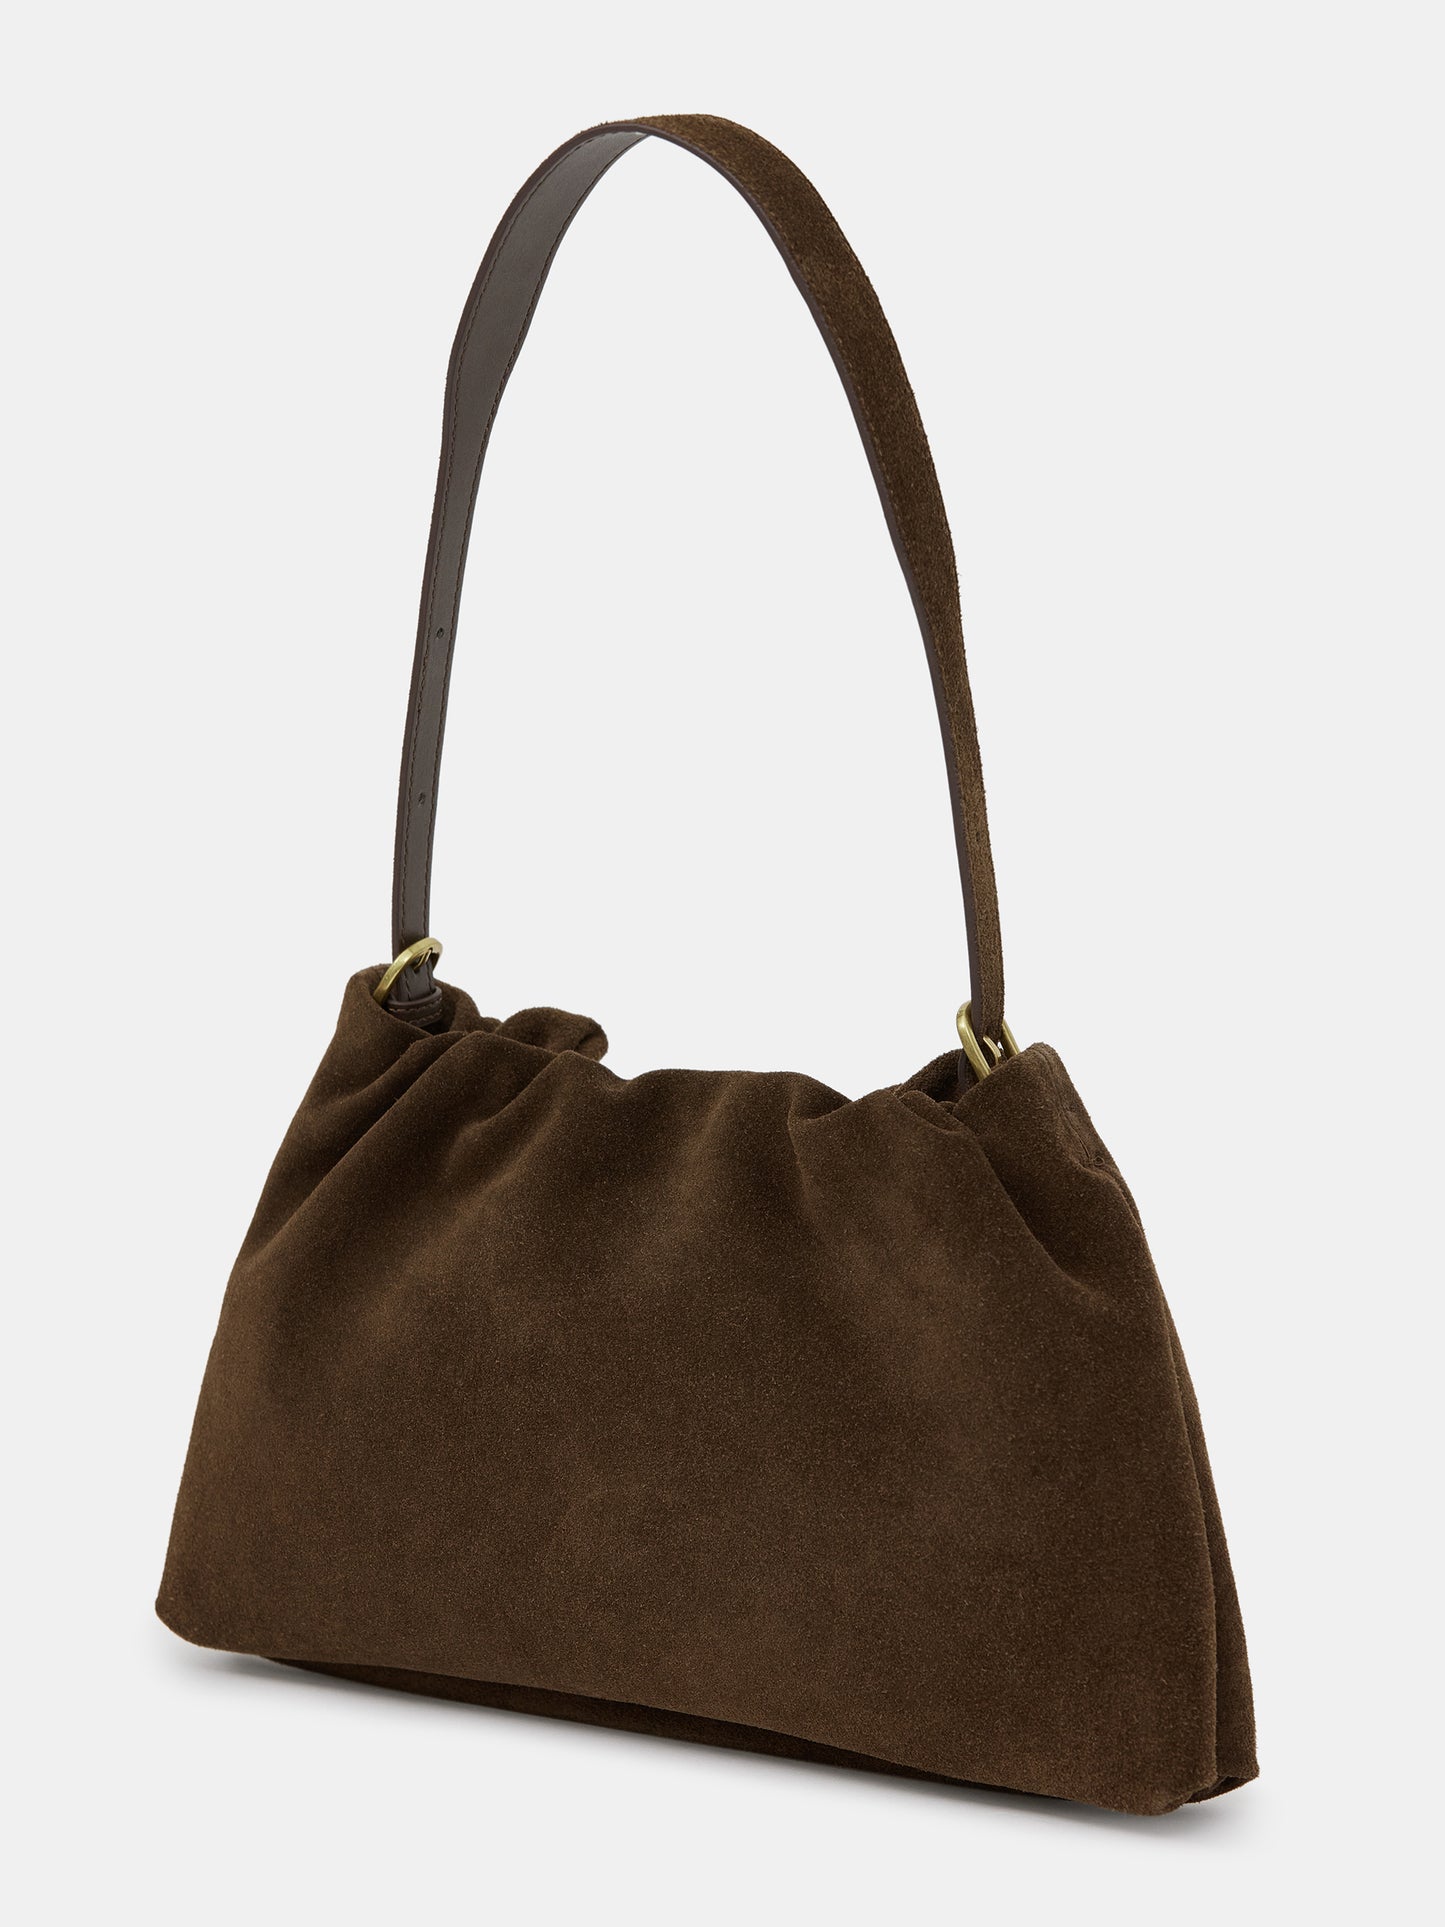 Origami Suede Bag, Cocoa – SourceUnknown